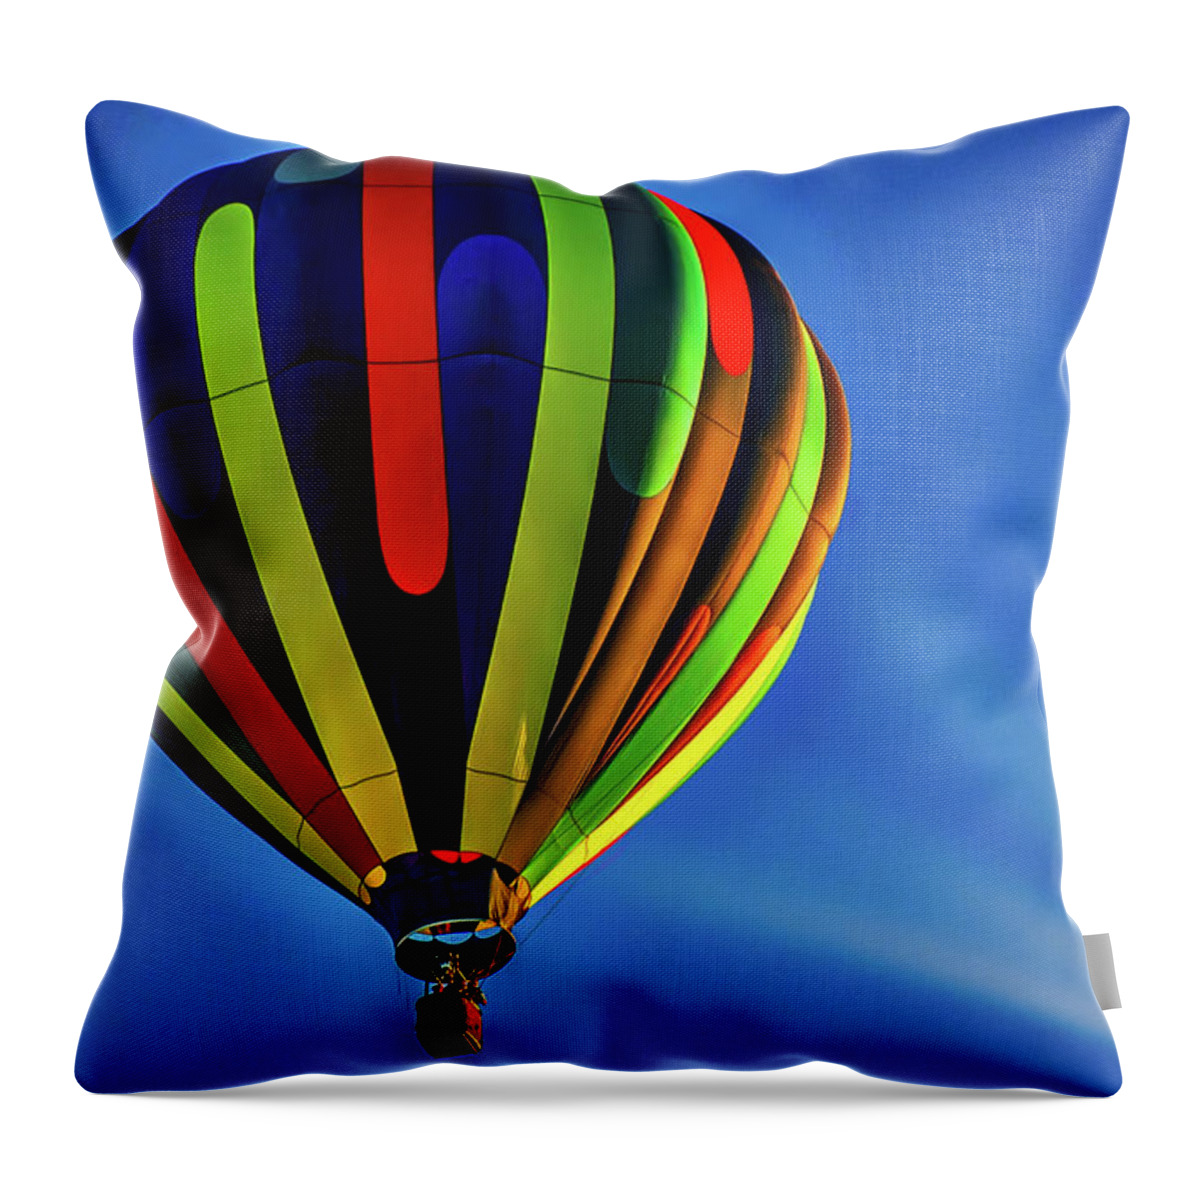 Albuquerque International Balloon Fiesta Throw Pillow featuring the photograph Mass Ascension of Balloons 7 by Donald Pash